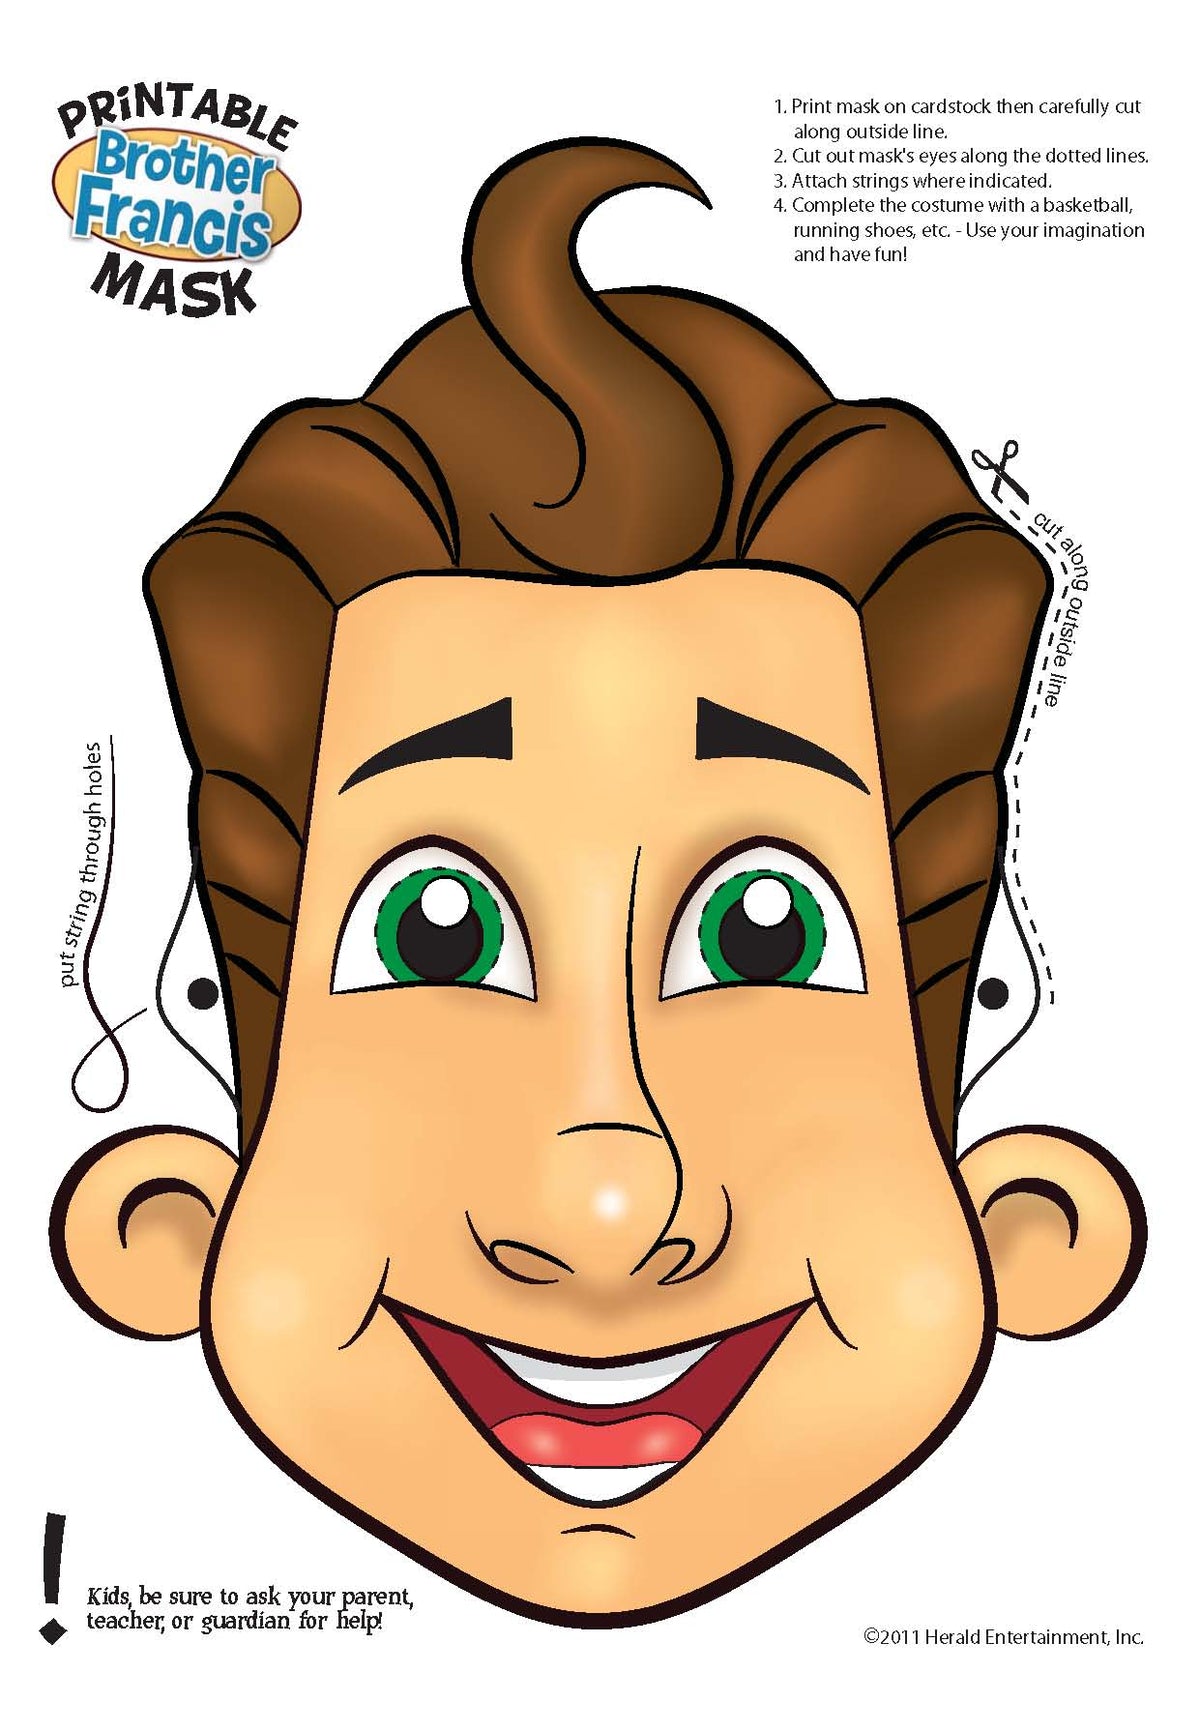 Download and Print - Brother Francis Mask Activity - B&W and Color